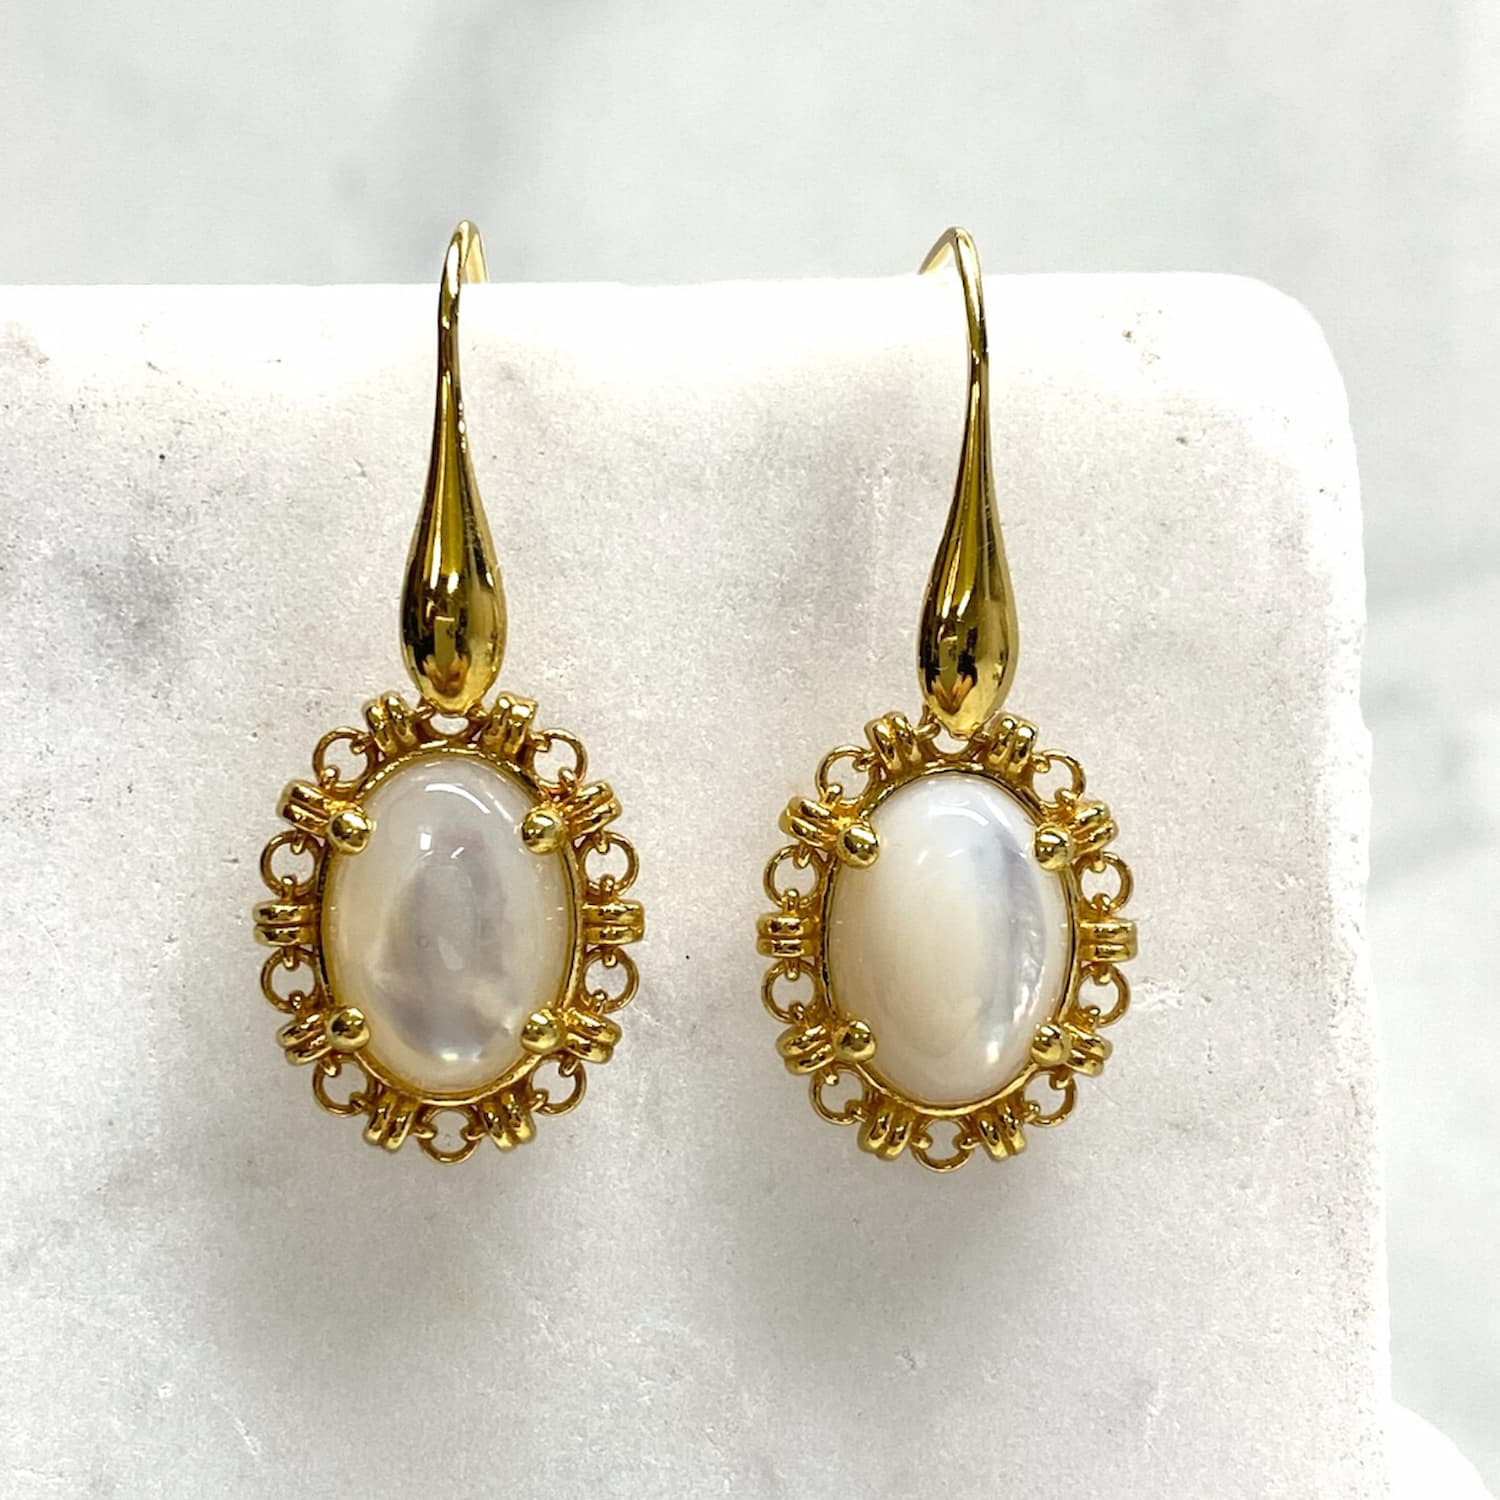 Aperitivo Earrings in Gold with Mother of Pearl